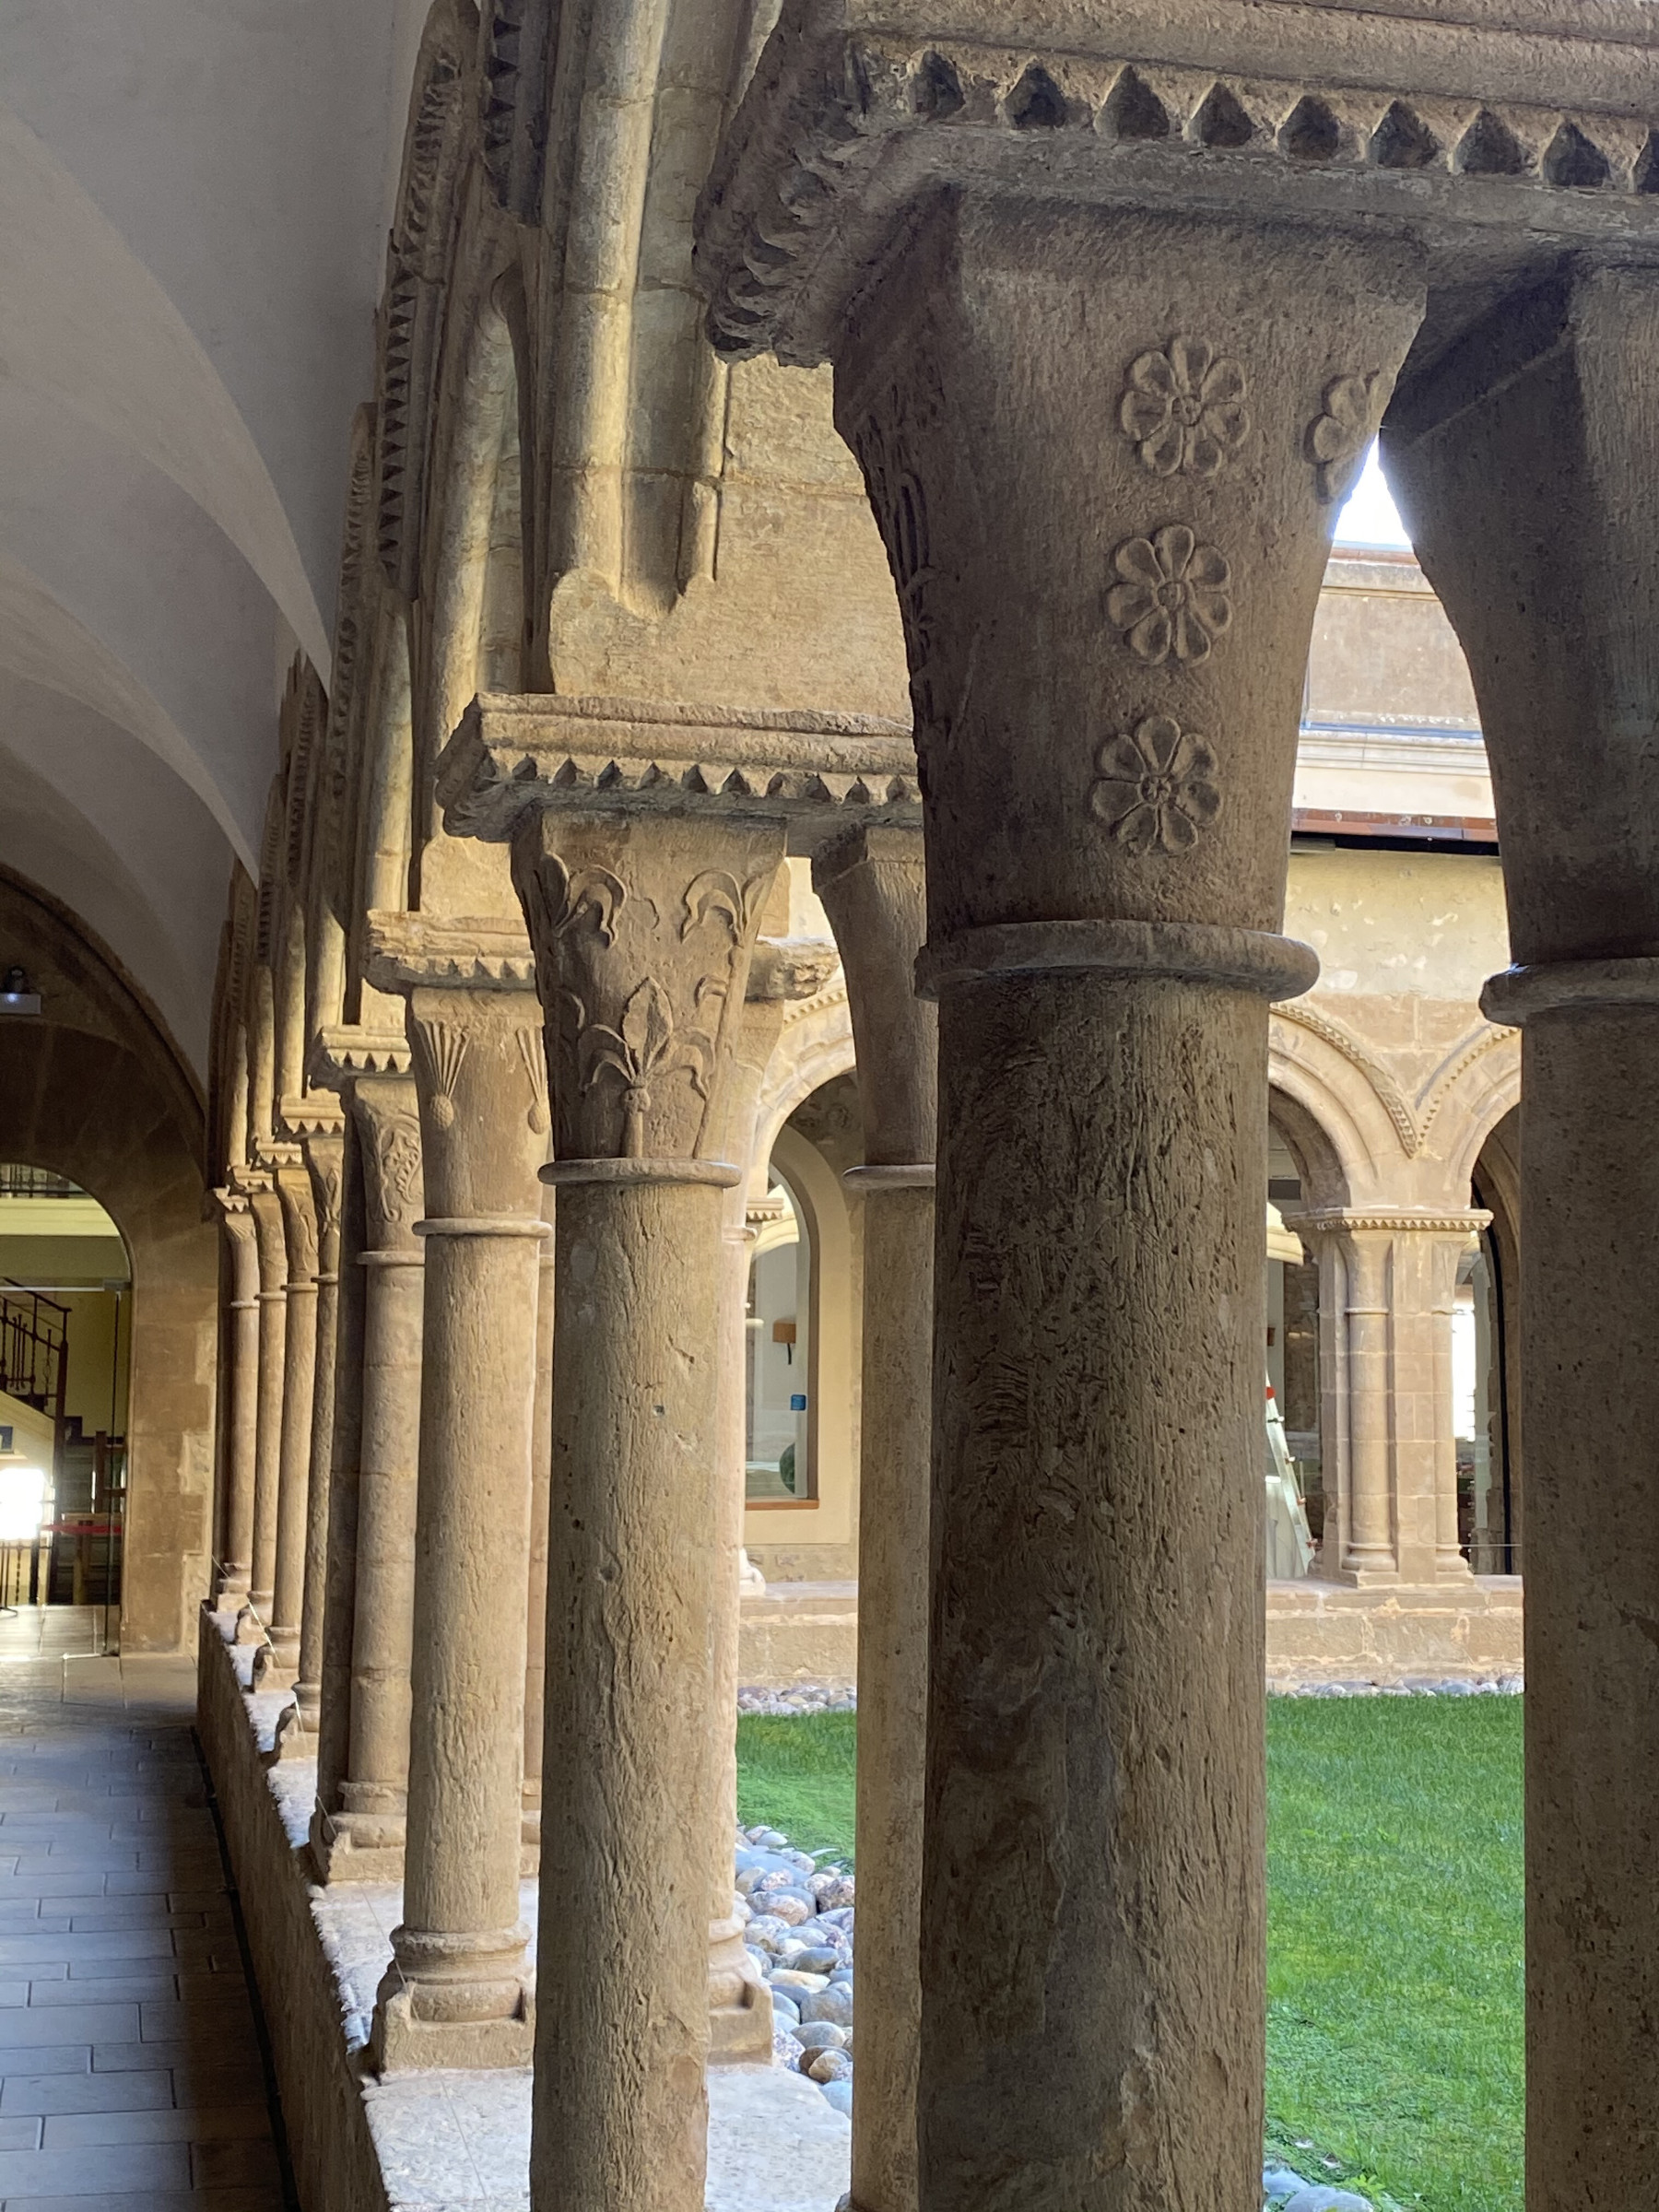 Cloister with stone arches supported by double columns and capitals decorated with bas-relief flowers or foliage, with carved tooth friezes on abaci.